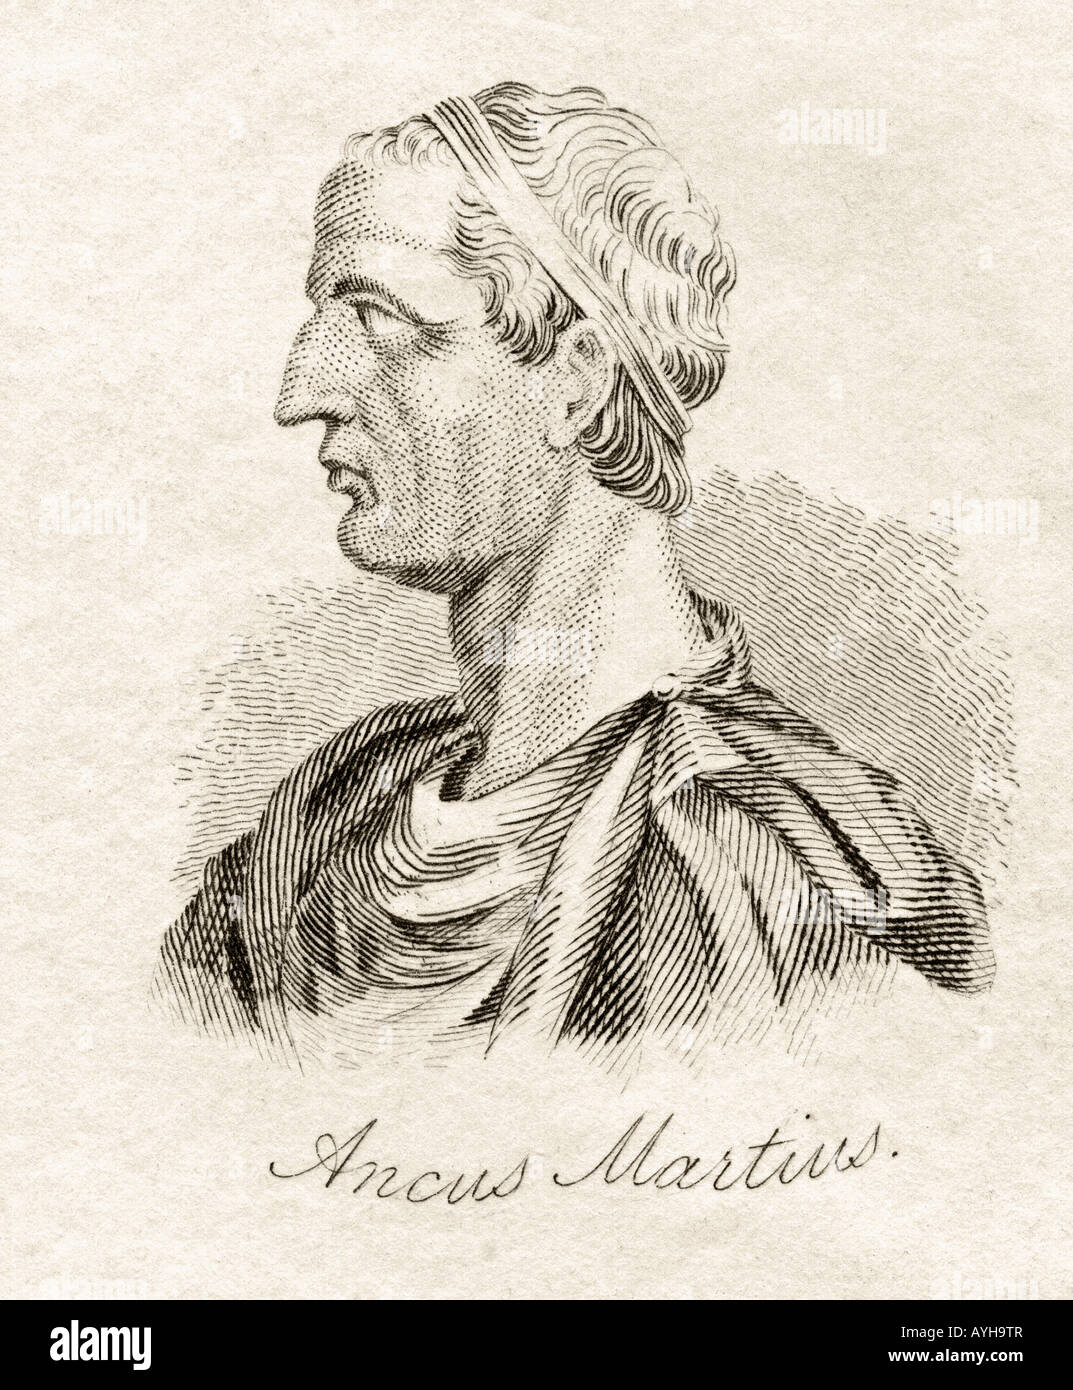 Ancus Marcius, 640BC - 616BC.  Fourth king of Rome.  From the book Crabb's Historical Dictionary, published 1825. Stock Photo